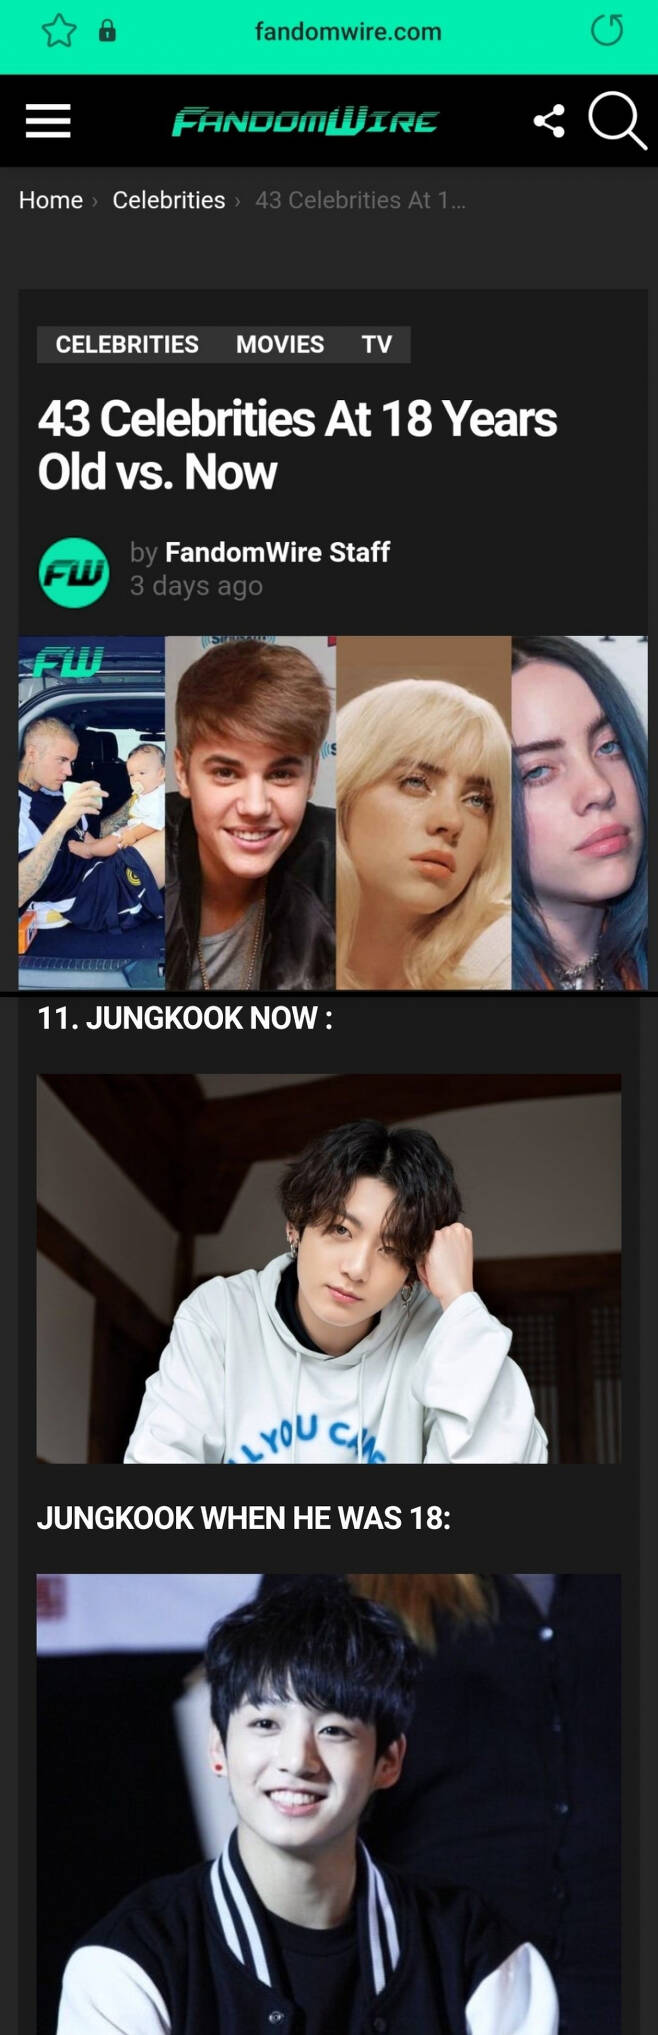 vs. Now ..BTS Jungkook, the only Réalisateur asiatique World Star among former World 43 CelebsUnited States of America entertainment media fandomwire recently said: 43 Celeb 18 years oldAnd now, introducing the former World 43 Celebs with their 18 years oldI posted a picture comparing the present and attracted attention.In particular, Jungkook made a strong global influence and presence in that he was the only one with 42 prominent superstars and Réalisateur asiatiques that wrinkled the times.18 years old, which is very different from now.And the photos of the recent selves added to the fun and interest of watching and attracted more attention.18 years old in the picture introducedJungkook was looking at the fans with a clear face with a pure eye smile at the fan meeting place, so he looked back at the memories.In contrast, Jungkook is also impressed with his mature masculinity, with his long wave hair and his fascinating eyes.Meanwhile, Jungkook is also listed on the Réalisateur asiatique top rankings with worldly pop stars on the United States of America celebrity popular analytics site Famous Birthdays.Jungkook ranks 19th in the Worlds Most Popular Pop Singers category of Famous Birthdays as of Wednesday.It is the only Réalisateur asiatique in the top 20.